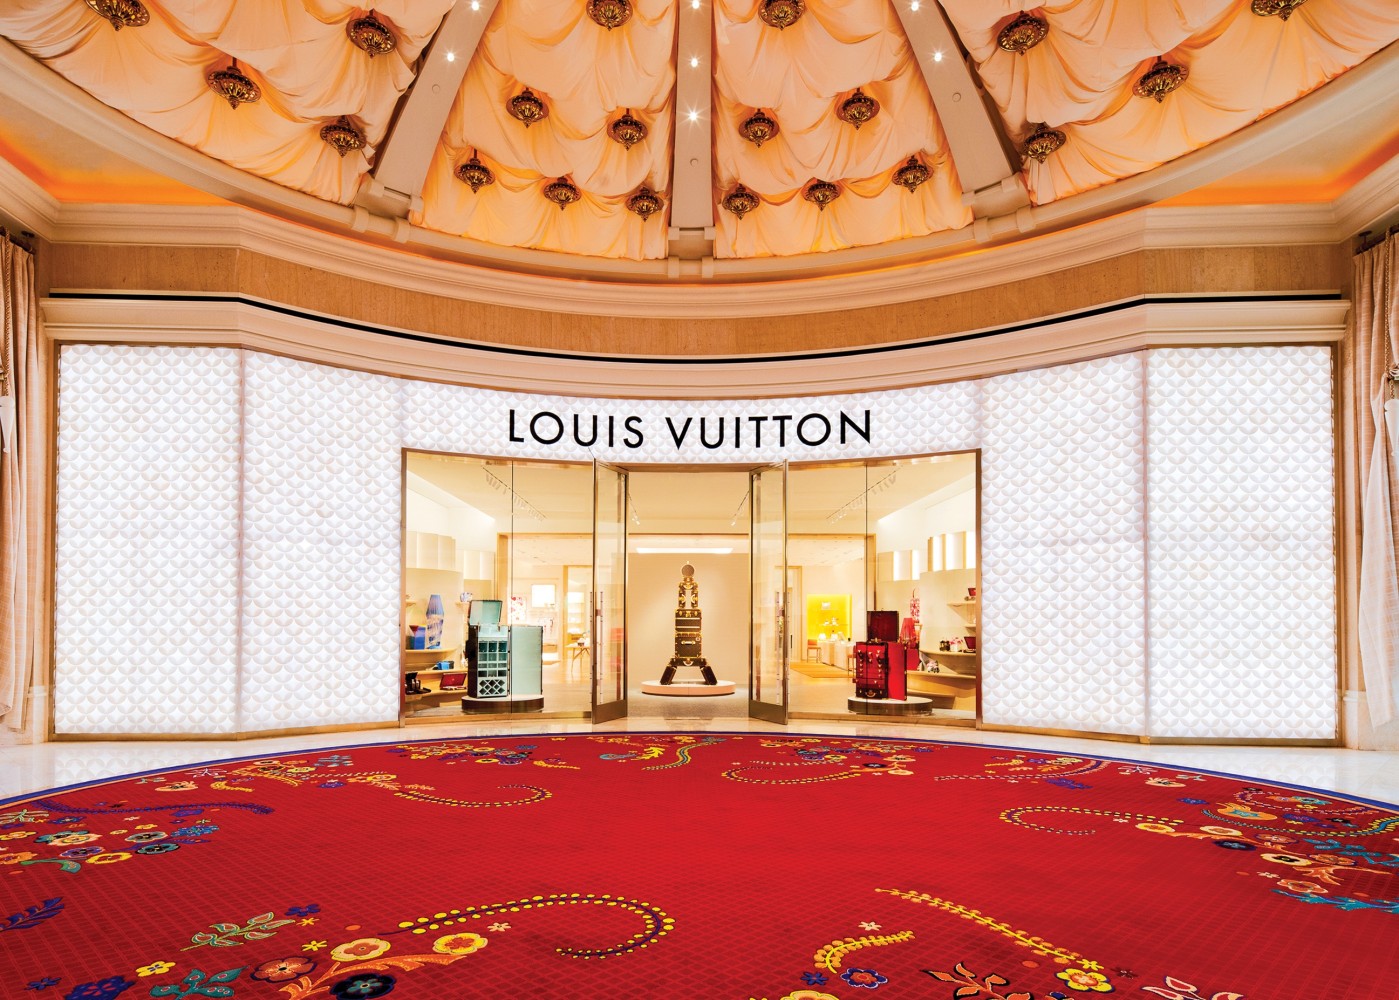 Louis Vuitton’s largest store in the world.